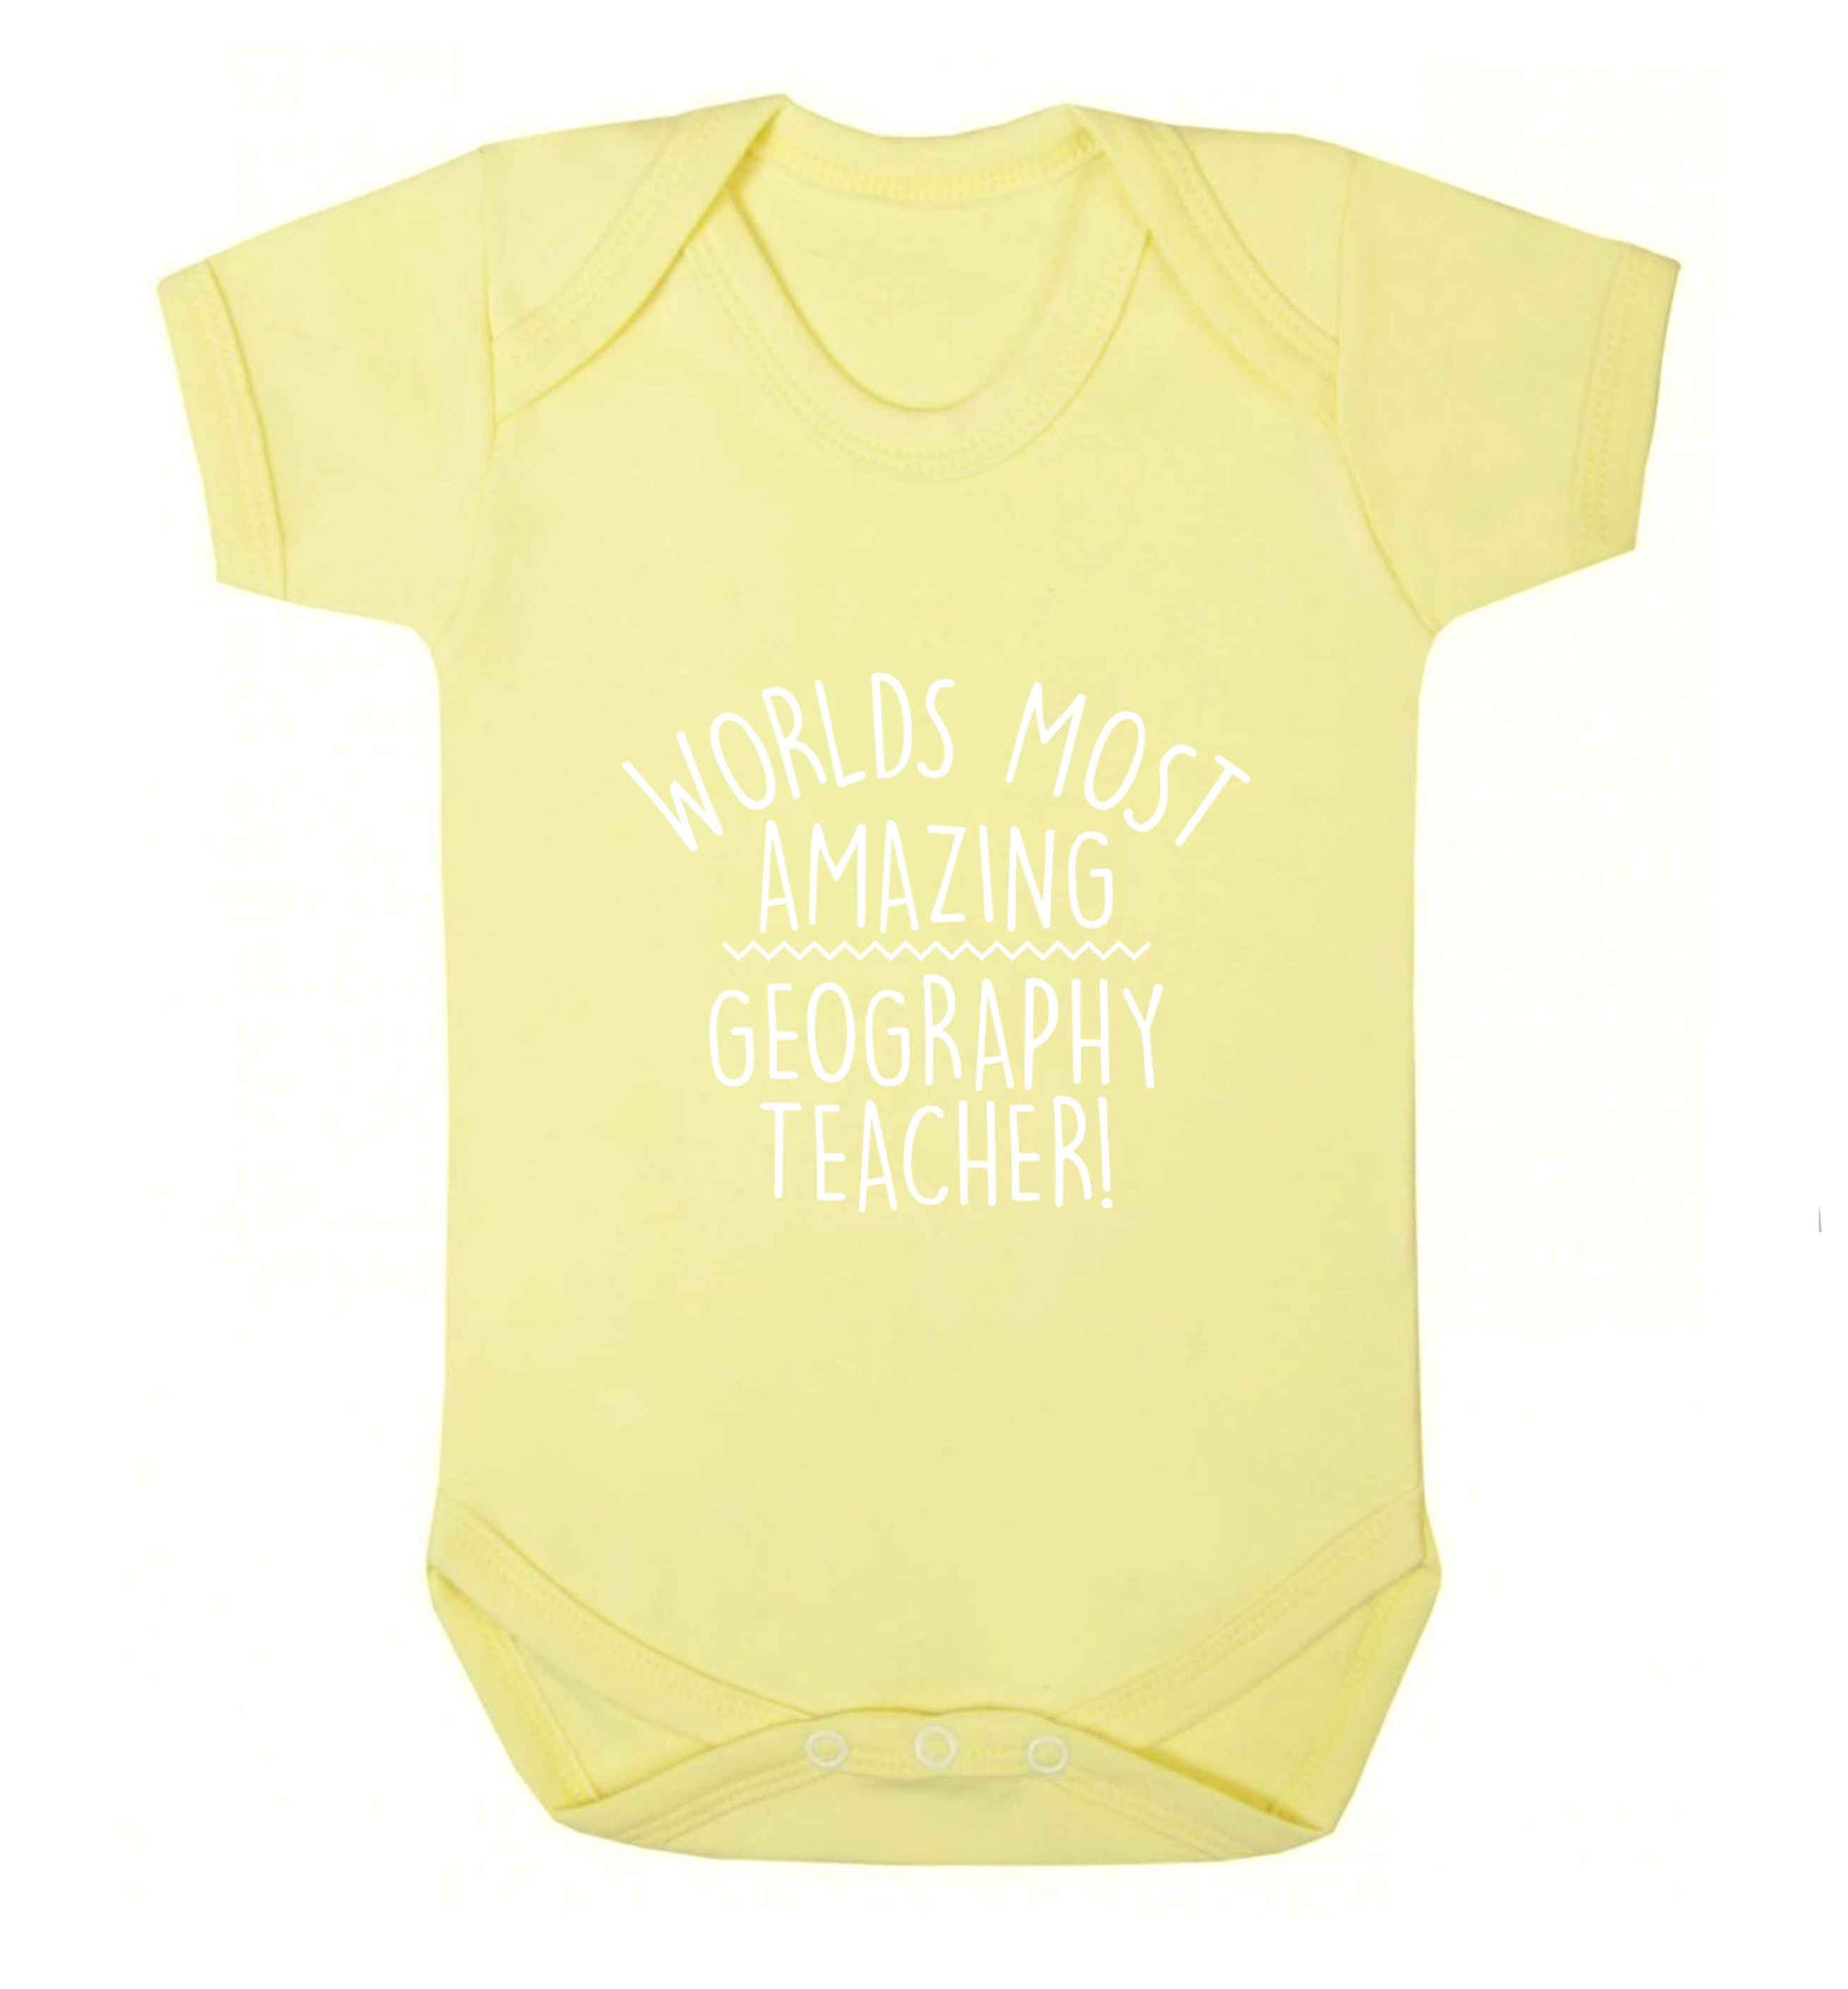 Worlds most amazing geography teacher baby vest pale yellow 18-24 months